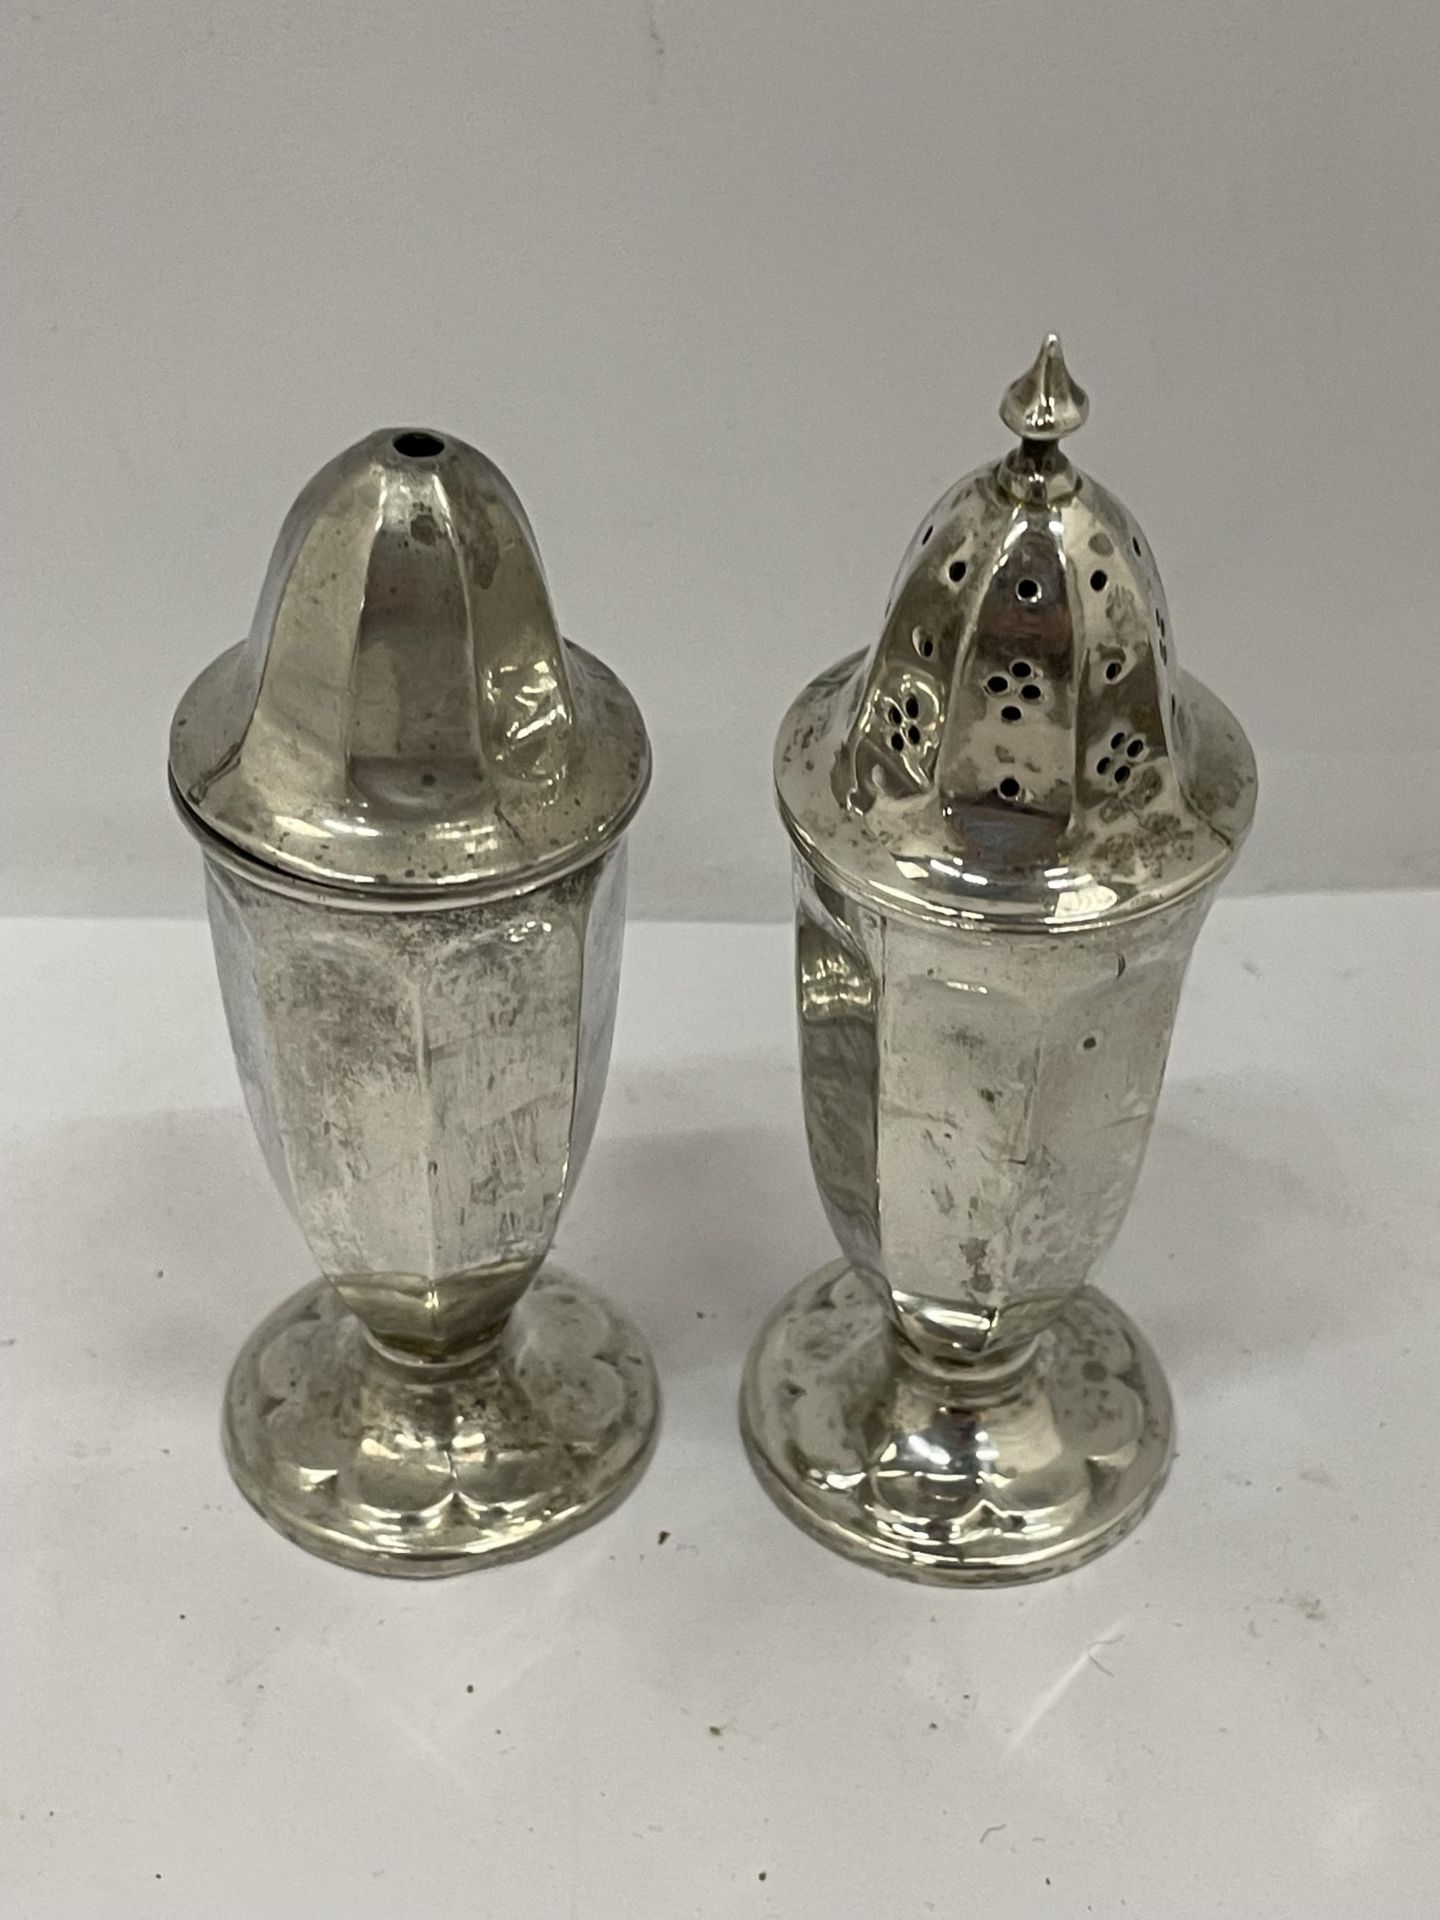 THREE HALLMARKED SILVER ITEMS, SILVER BACKED BRUSH AND SALT & PEPPER SHAKERS - Image 2 of 5